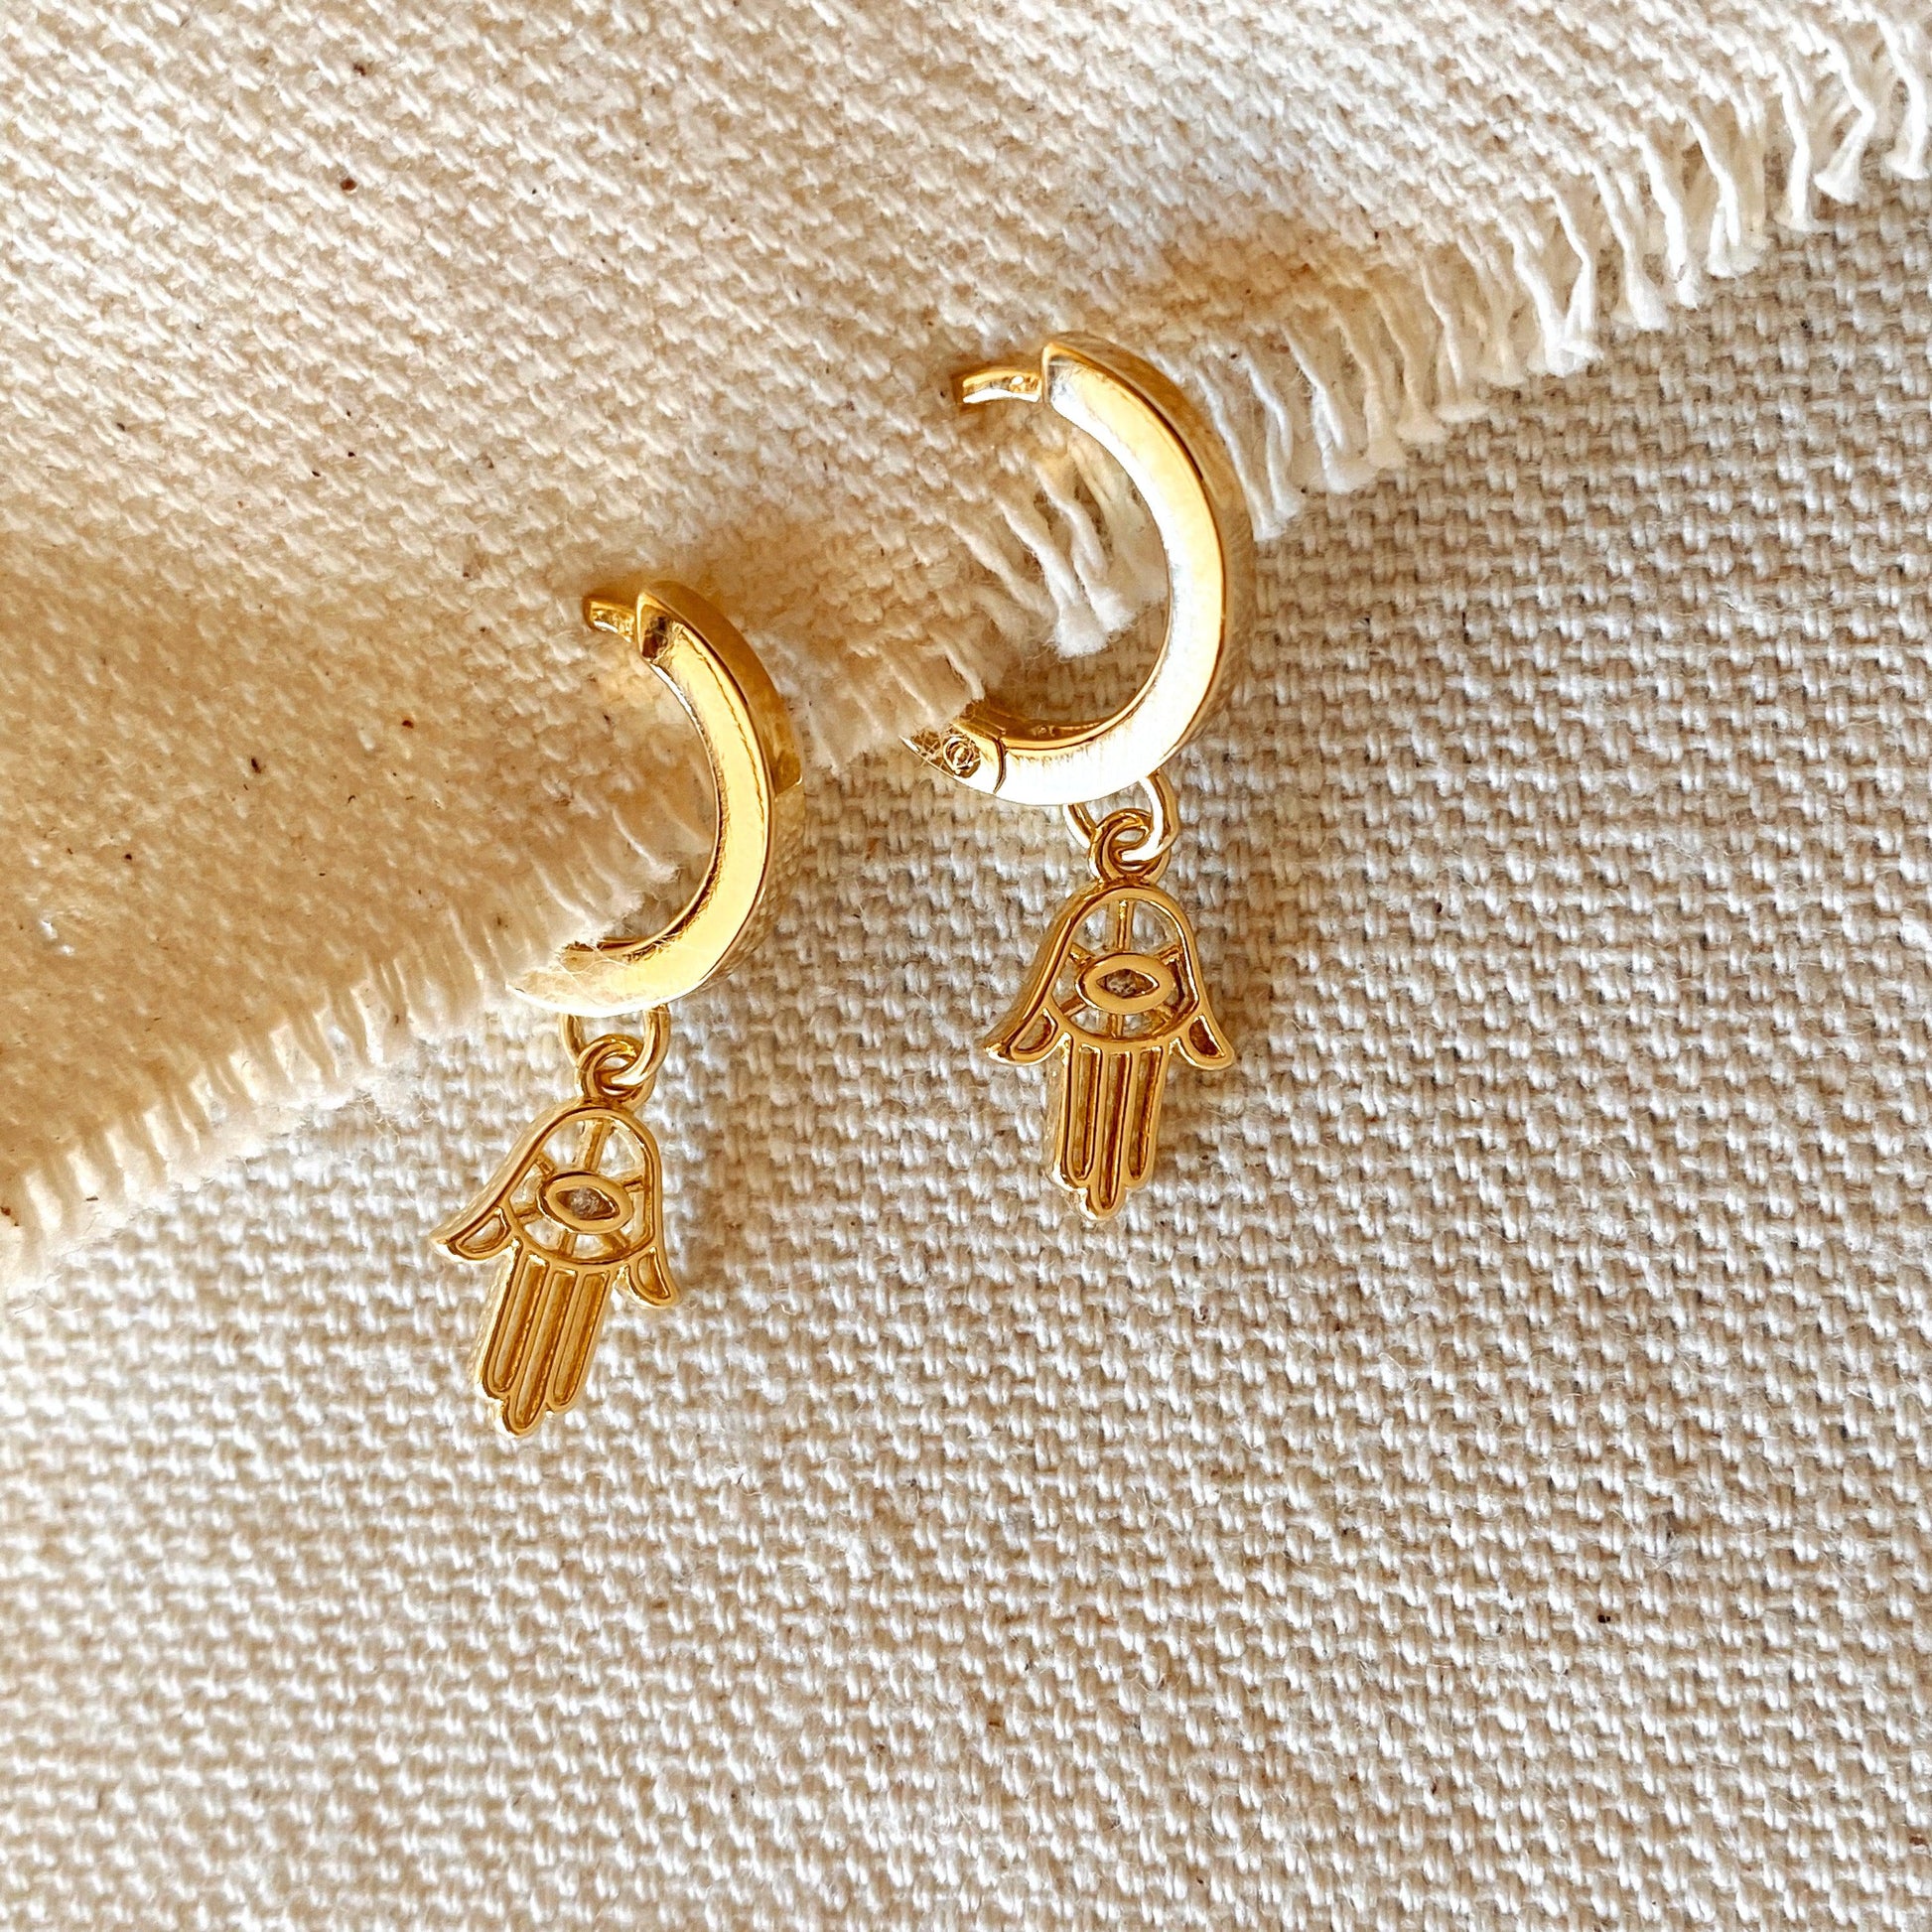 GoldFi 18k Gold Filled Hoop Earrings with Hamsa Amulet Charm